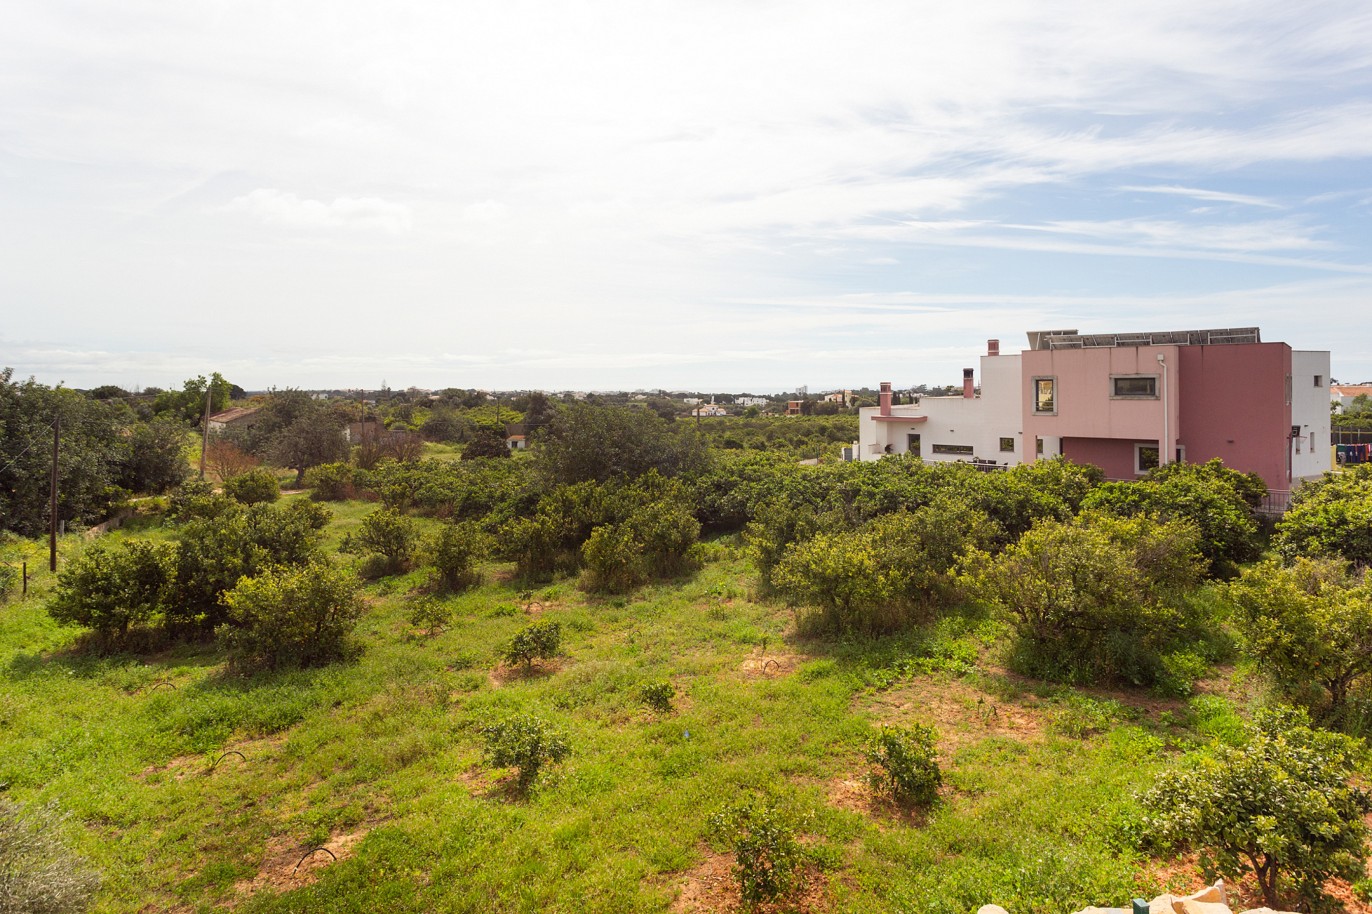 4 Bedroom Villa with pool, new construction, for sale in Albufeira, Algarve_220331